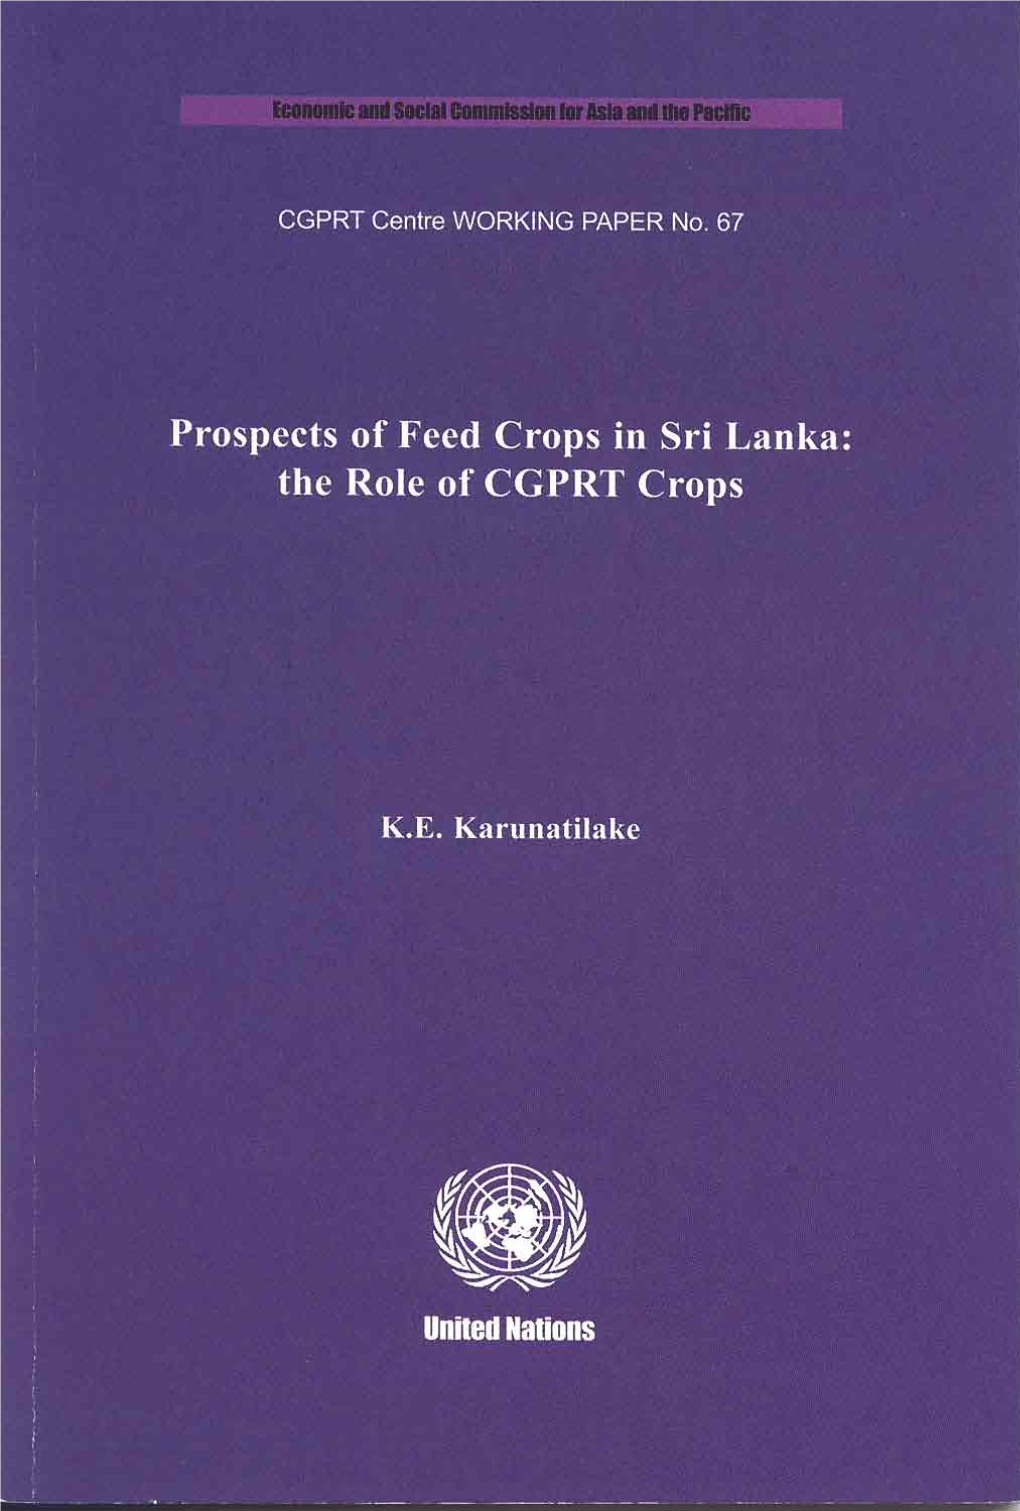 Prospects of Feed Crops in Sri Lanka: the Role of CGPRT Crops